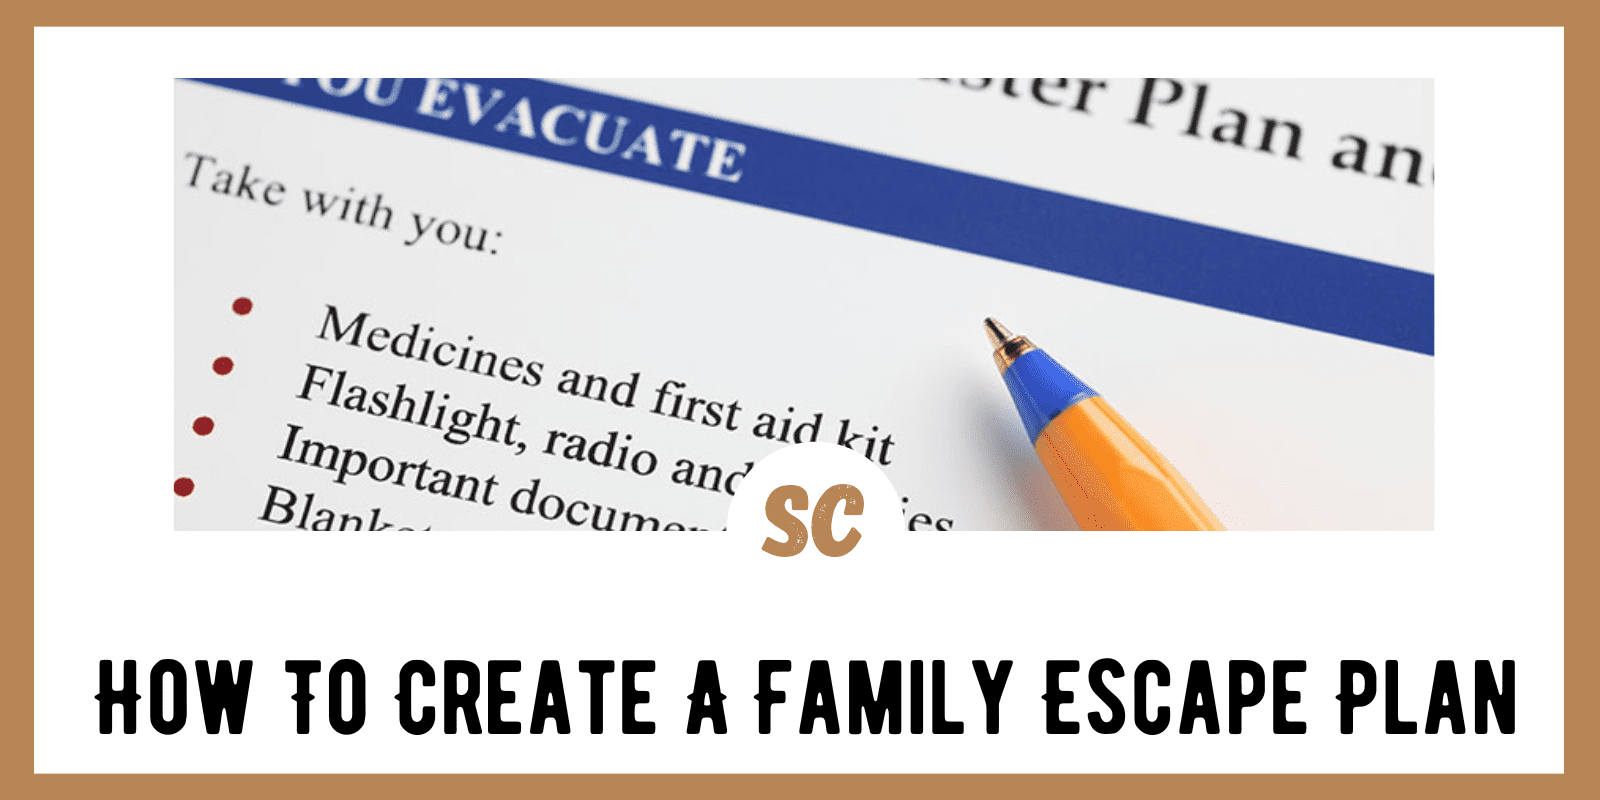 How To Create A Family Escape Plan